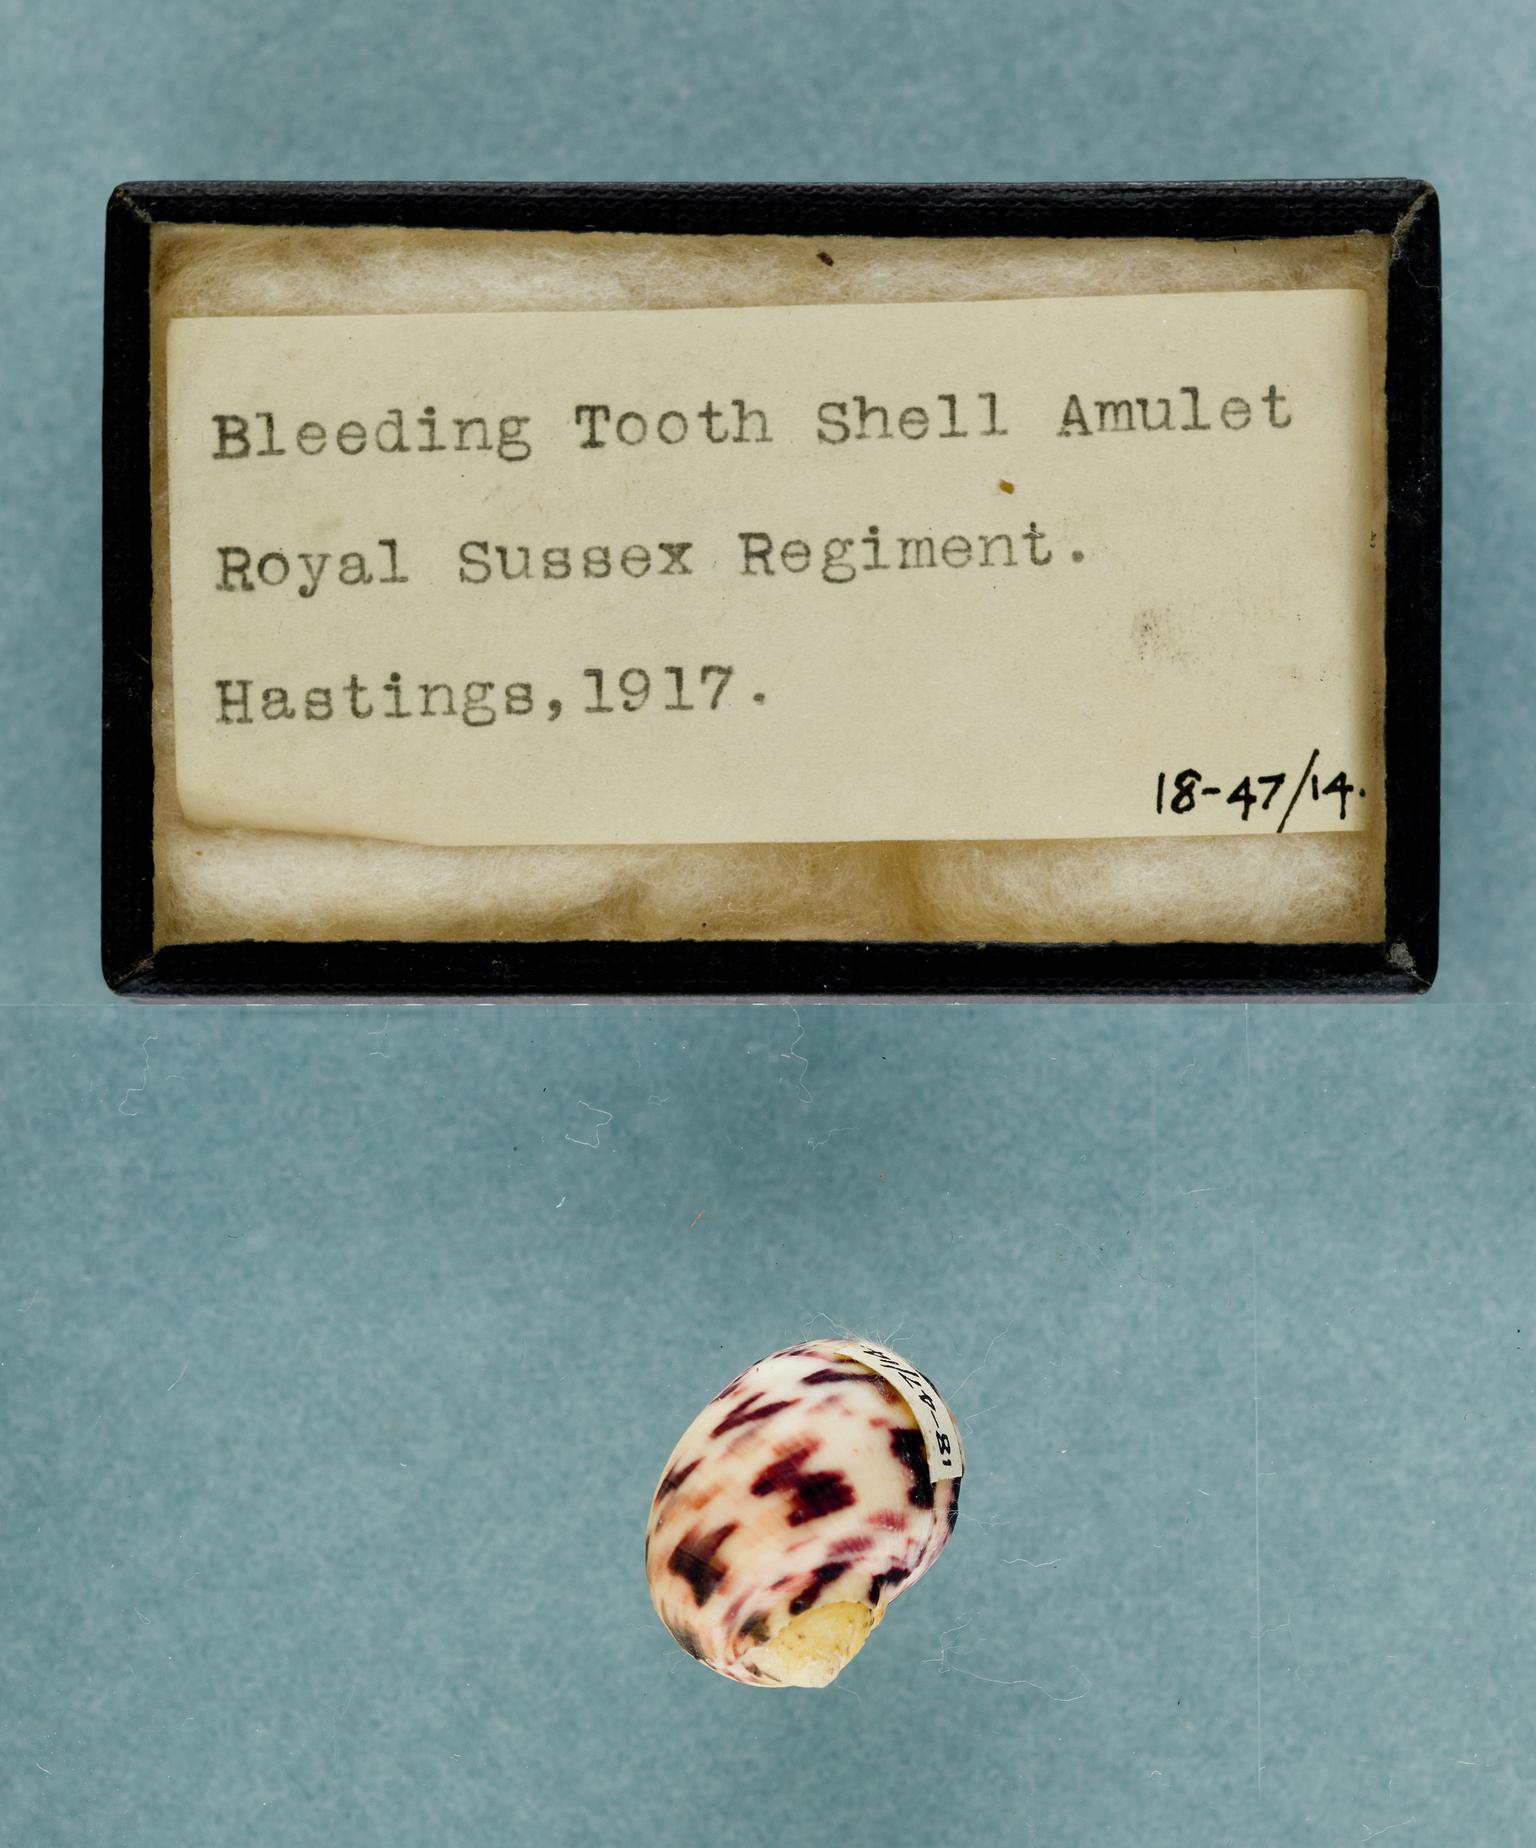 Bleeding tooth shell amulet